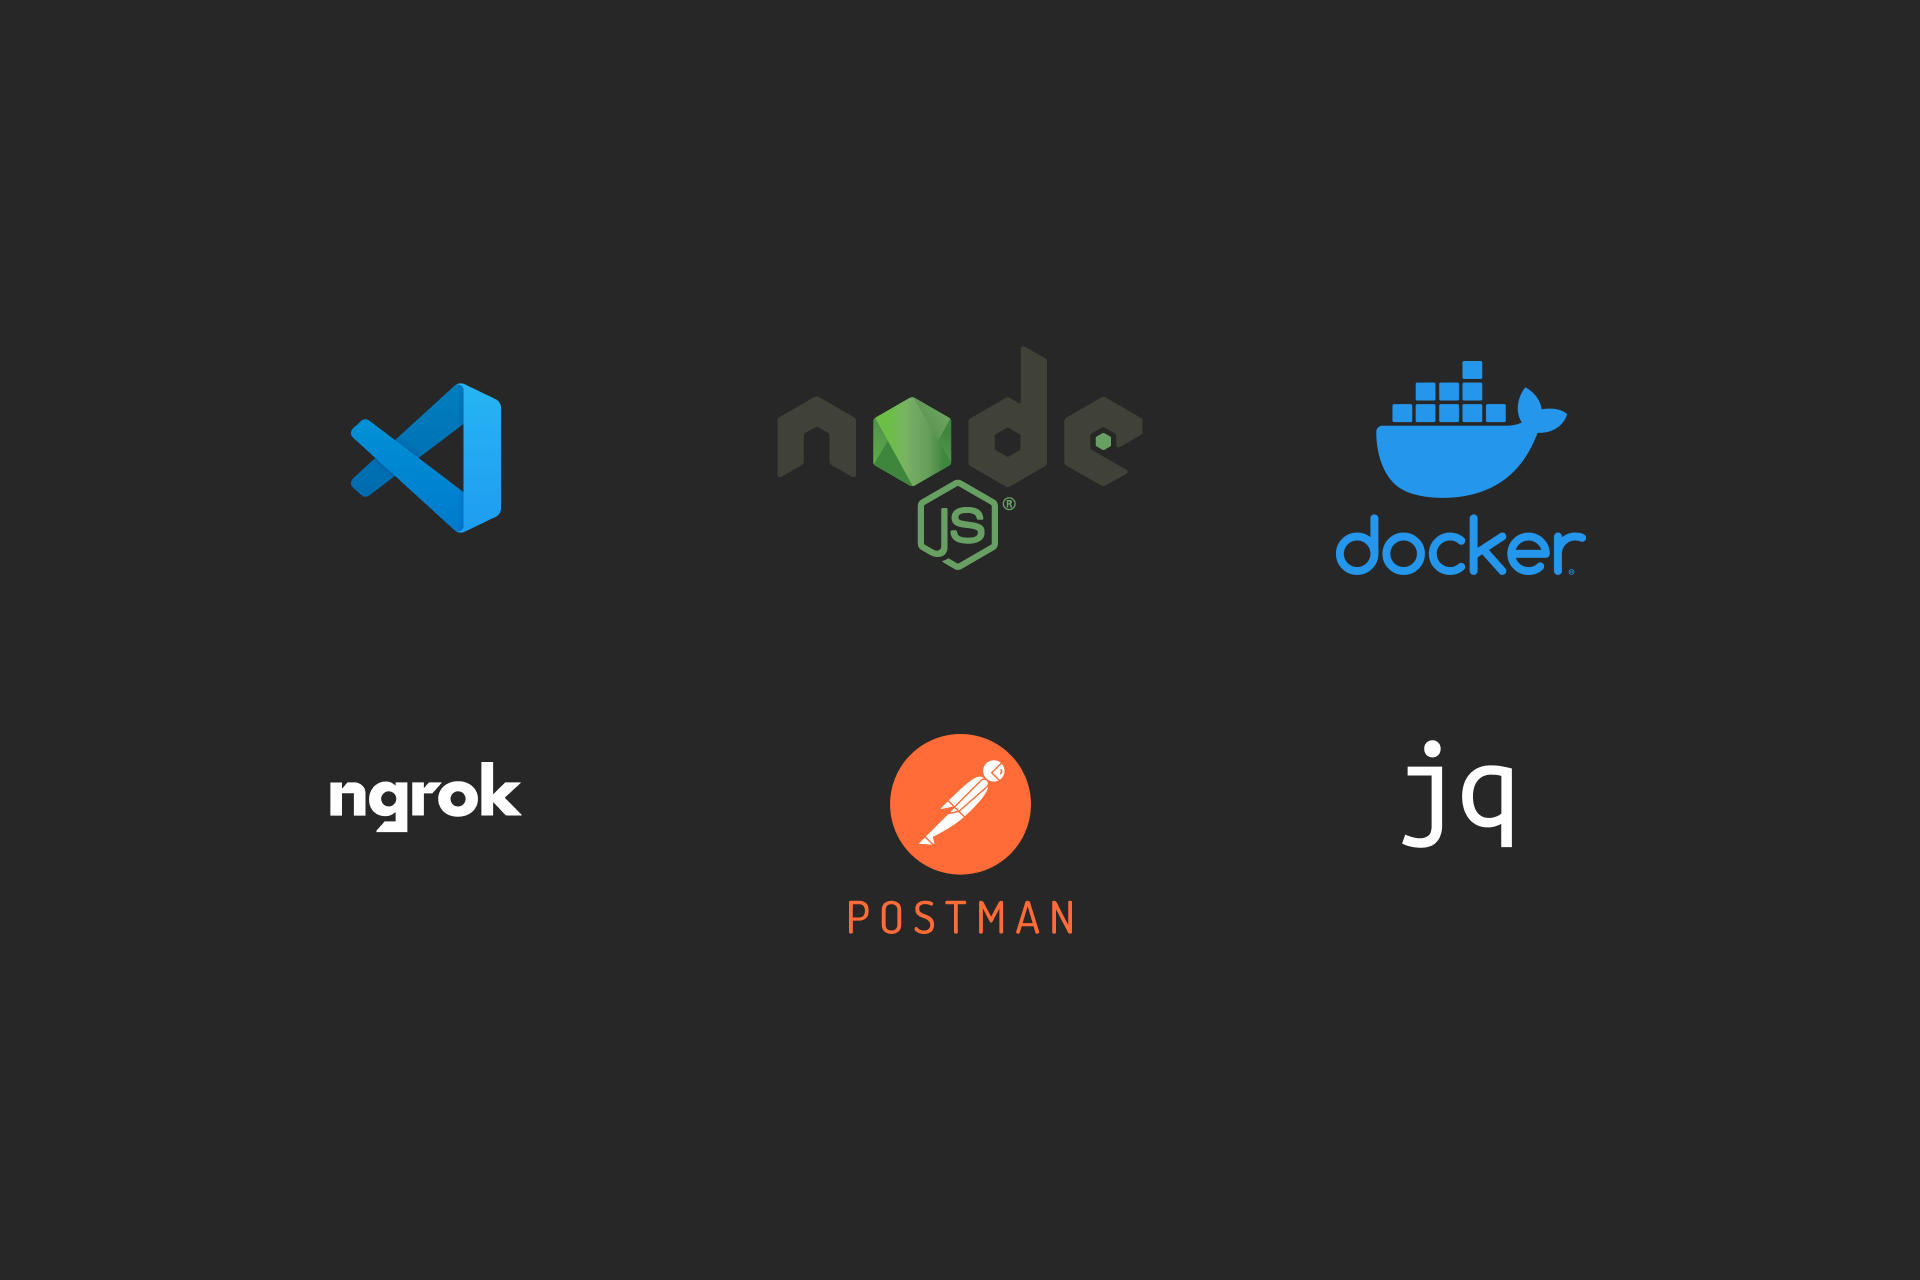 Logos of must have tools for full stack development